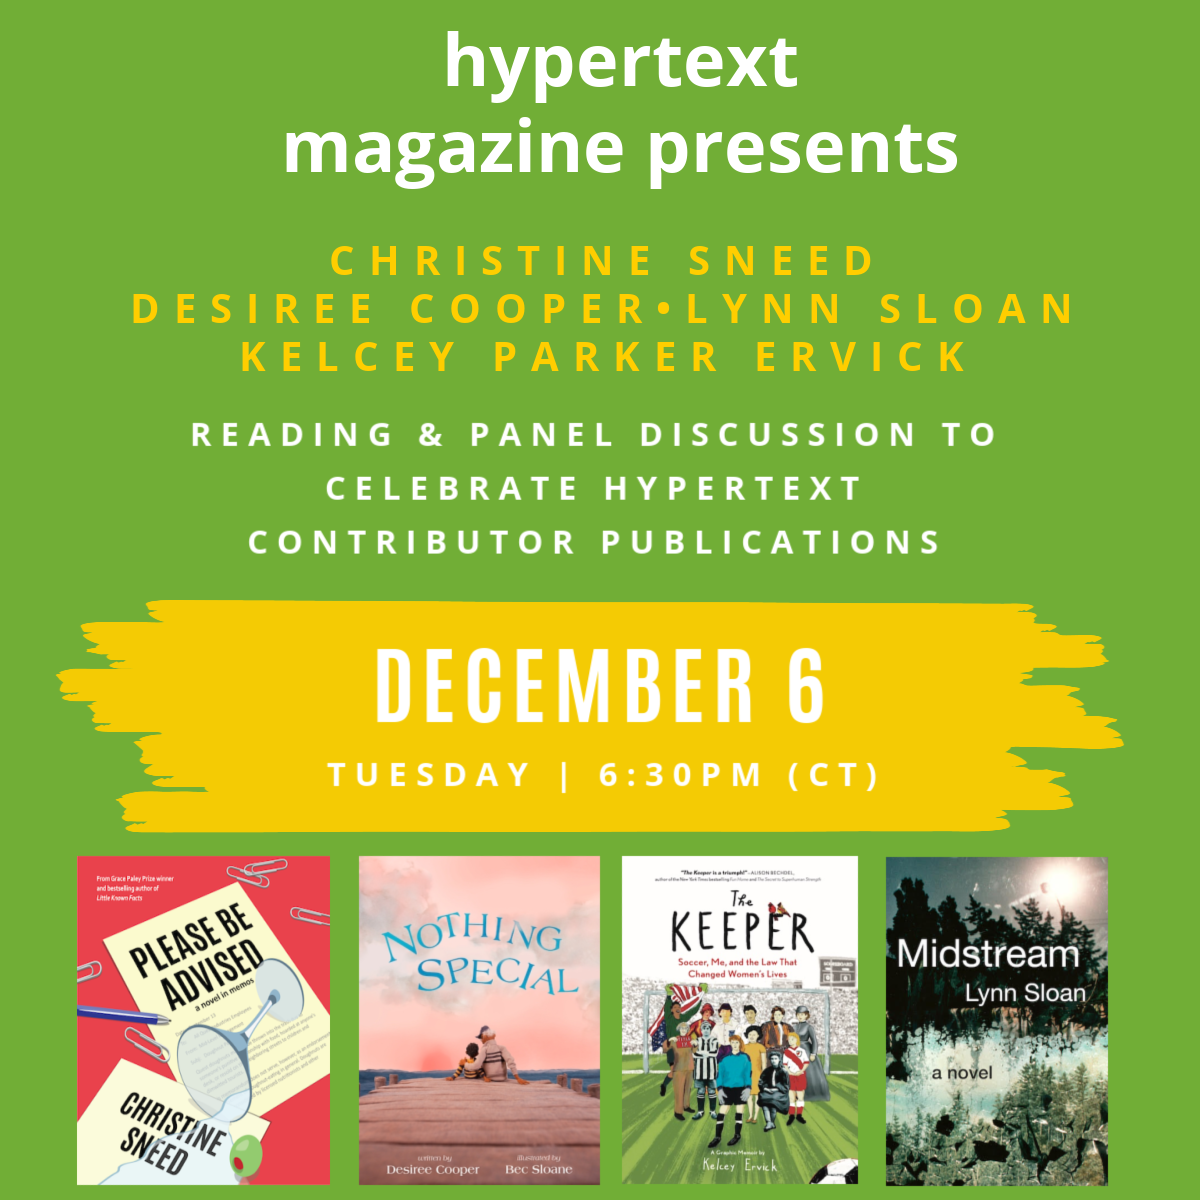 READING & PANEL DISCUSSION :: Let’s celebrate new publications by past contributors Christine Sneed (PLEASE BE ADVISED), Desiree Cooper (NOTHING SPECIAL), Lynn Sloan (MIDSTREAM), & Kelcey Parker Ervick (THE KEEPER). 